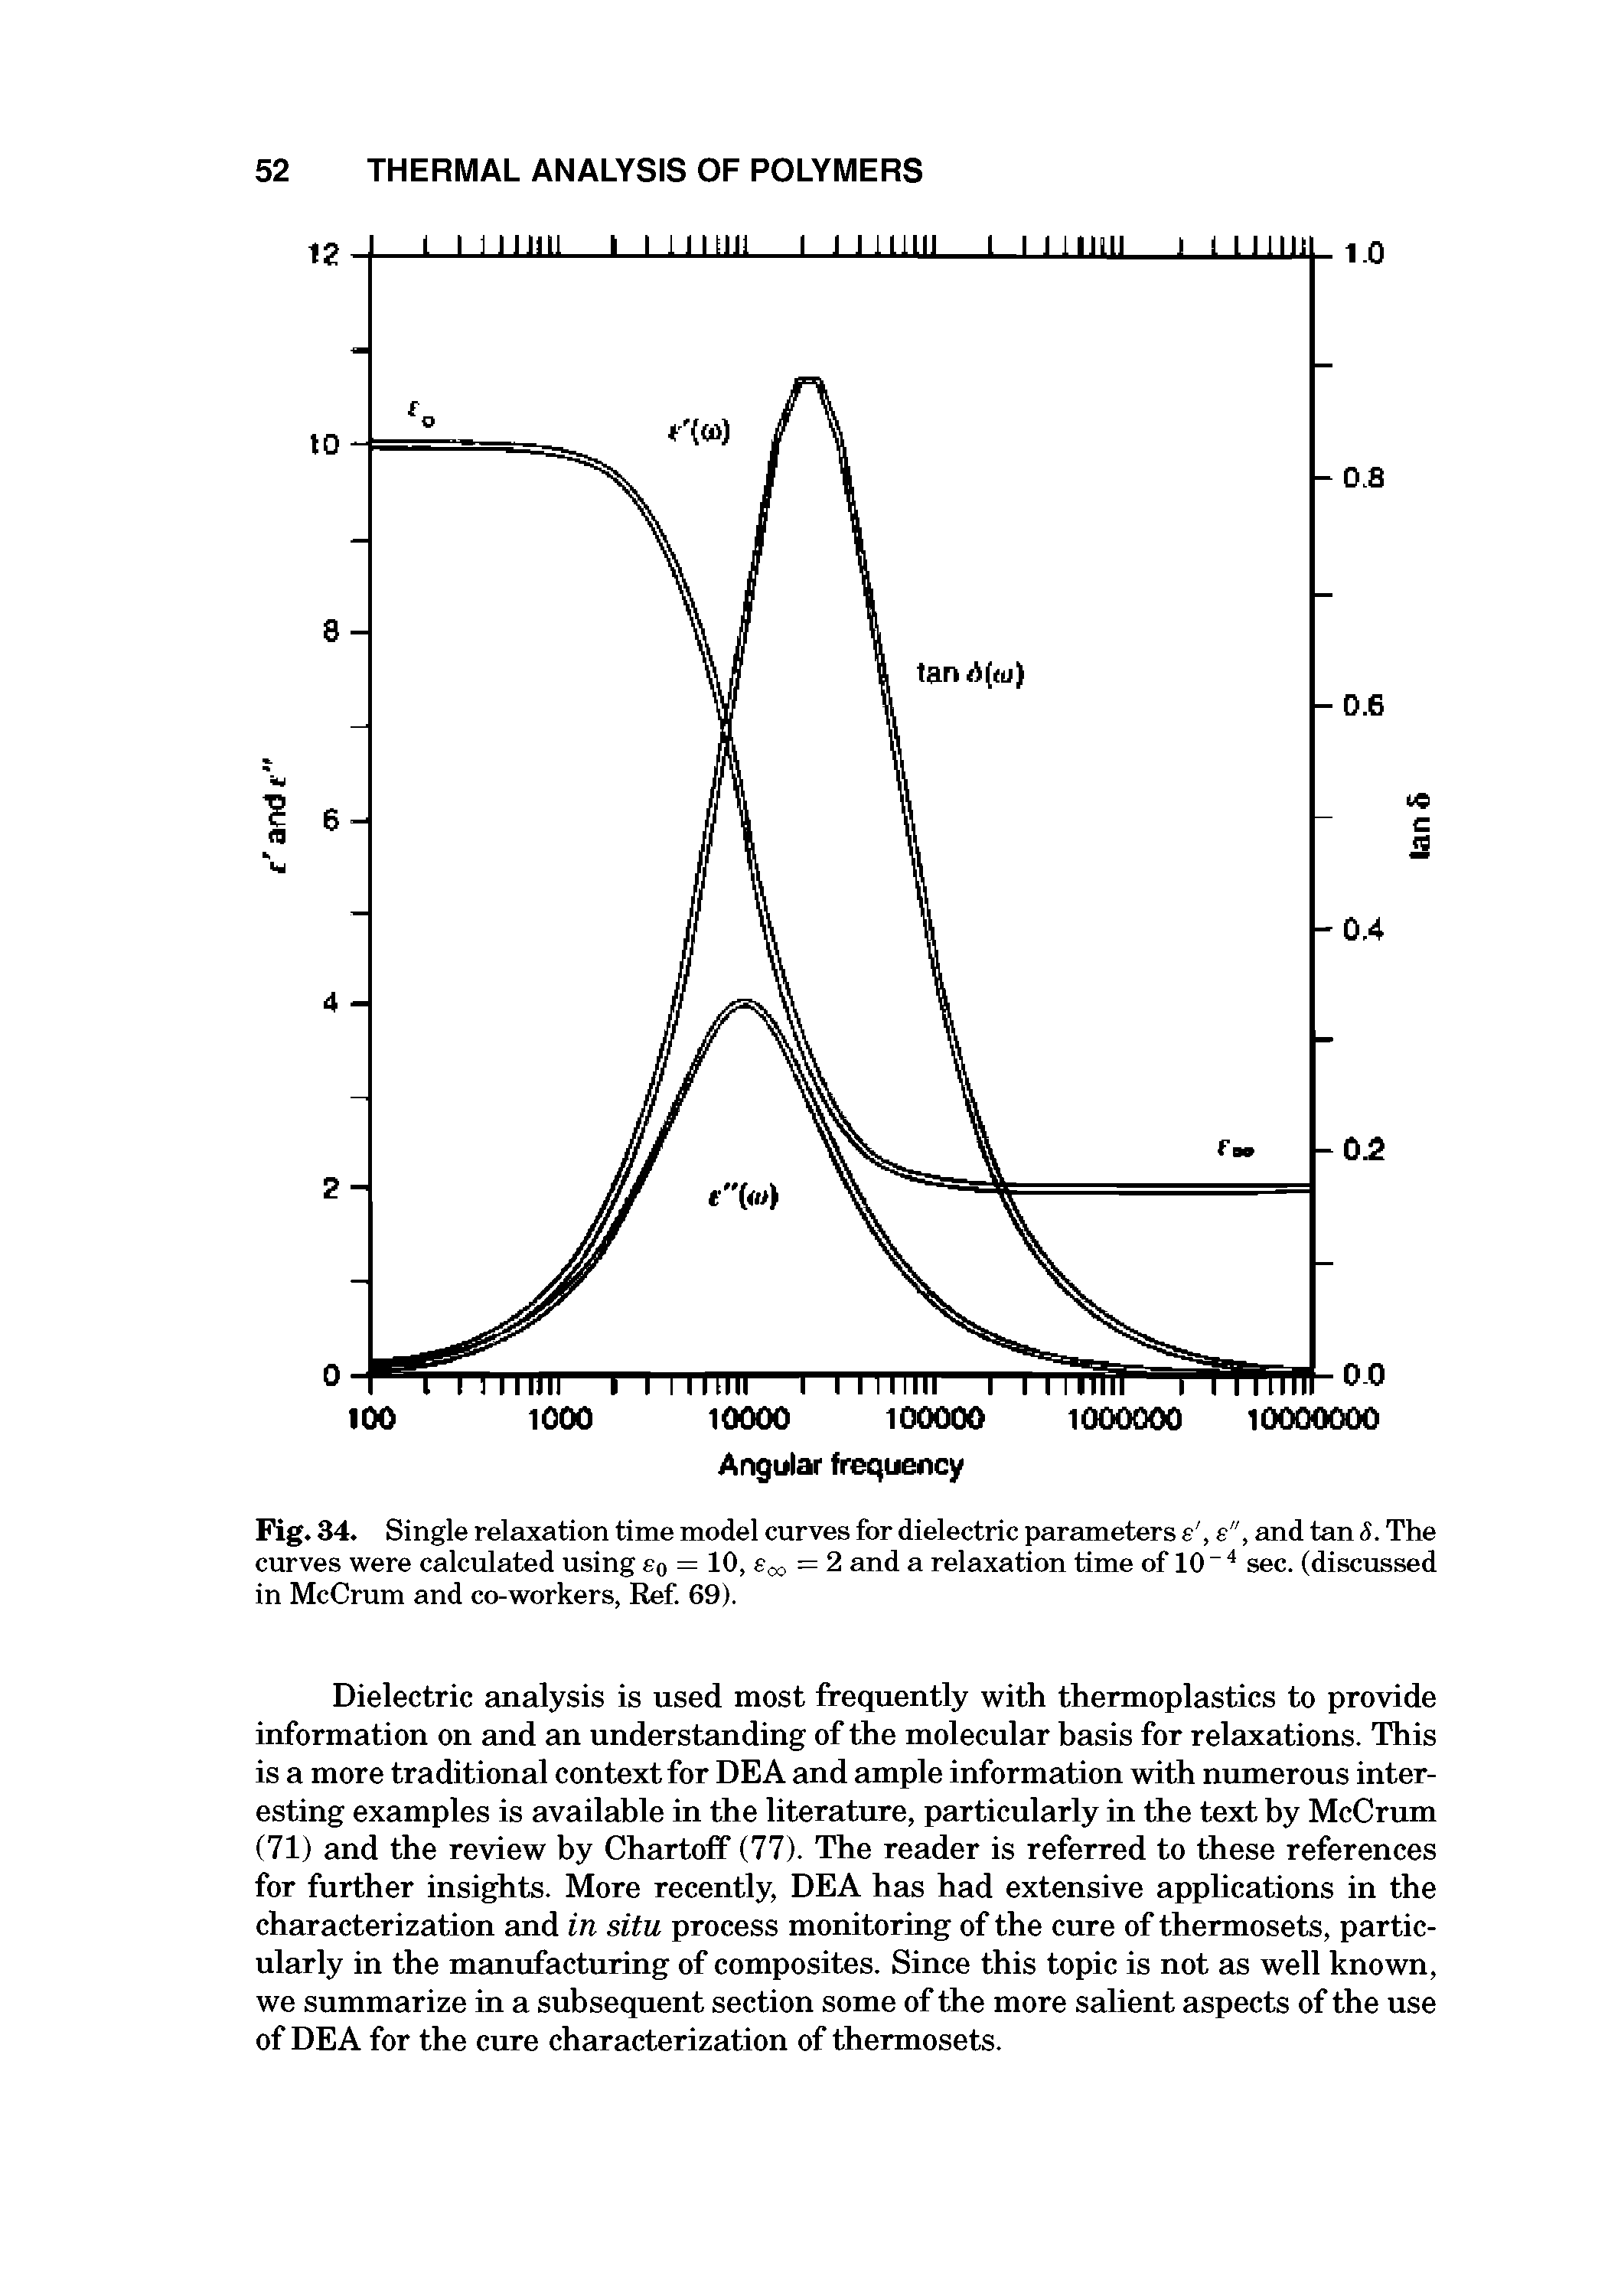 Fig. 34. Single relaxation time model curves for dielectric parameters s, and tan S. The curves were calculated using eo = 10, co = 2 and a relaxation time of 10 sec. (discussed in McCrum and co-workers, Ref 69).